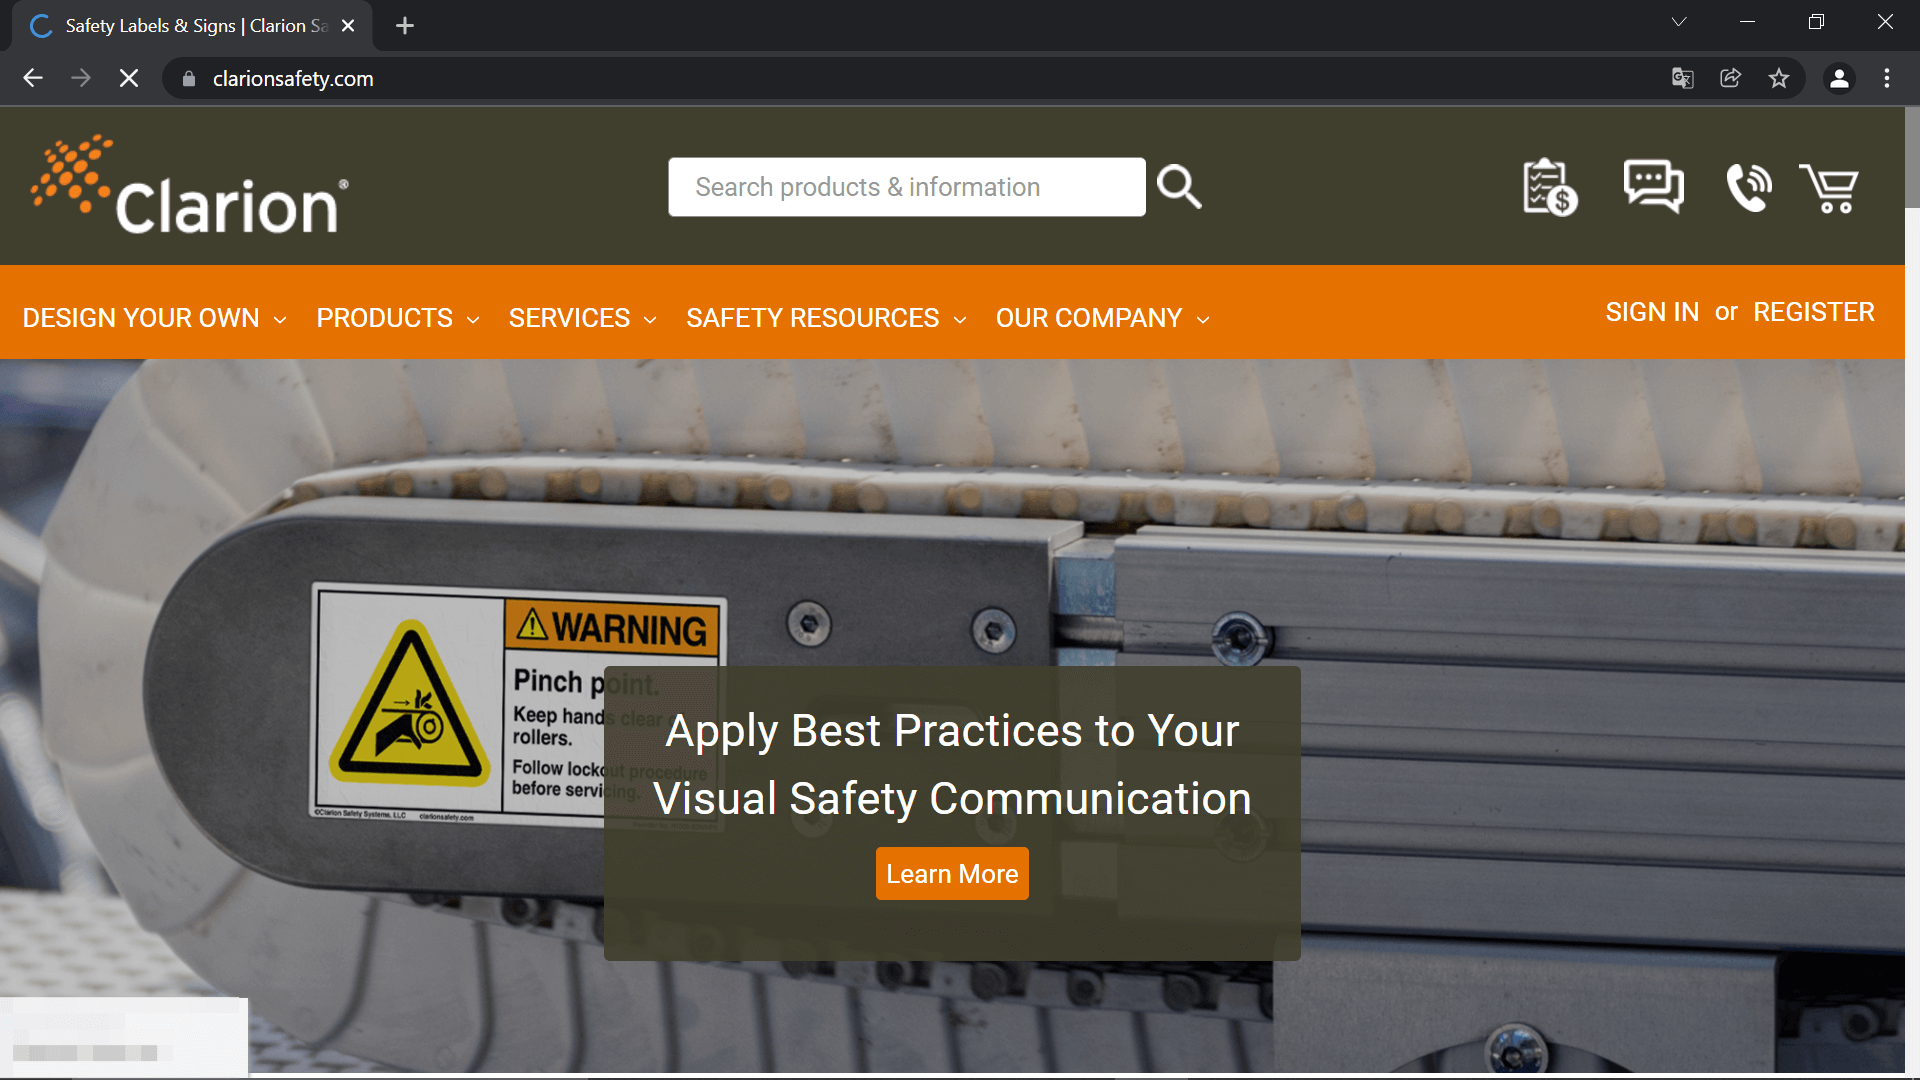 clarion safety systems is an example of whole ecommerce